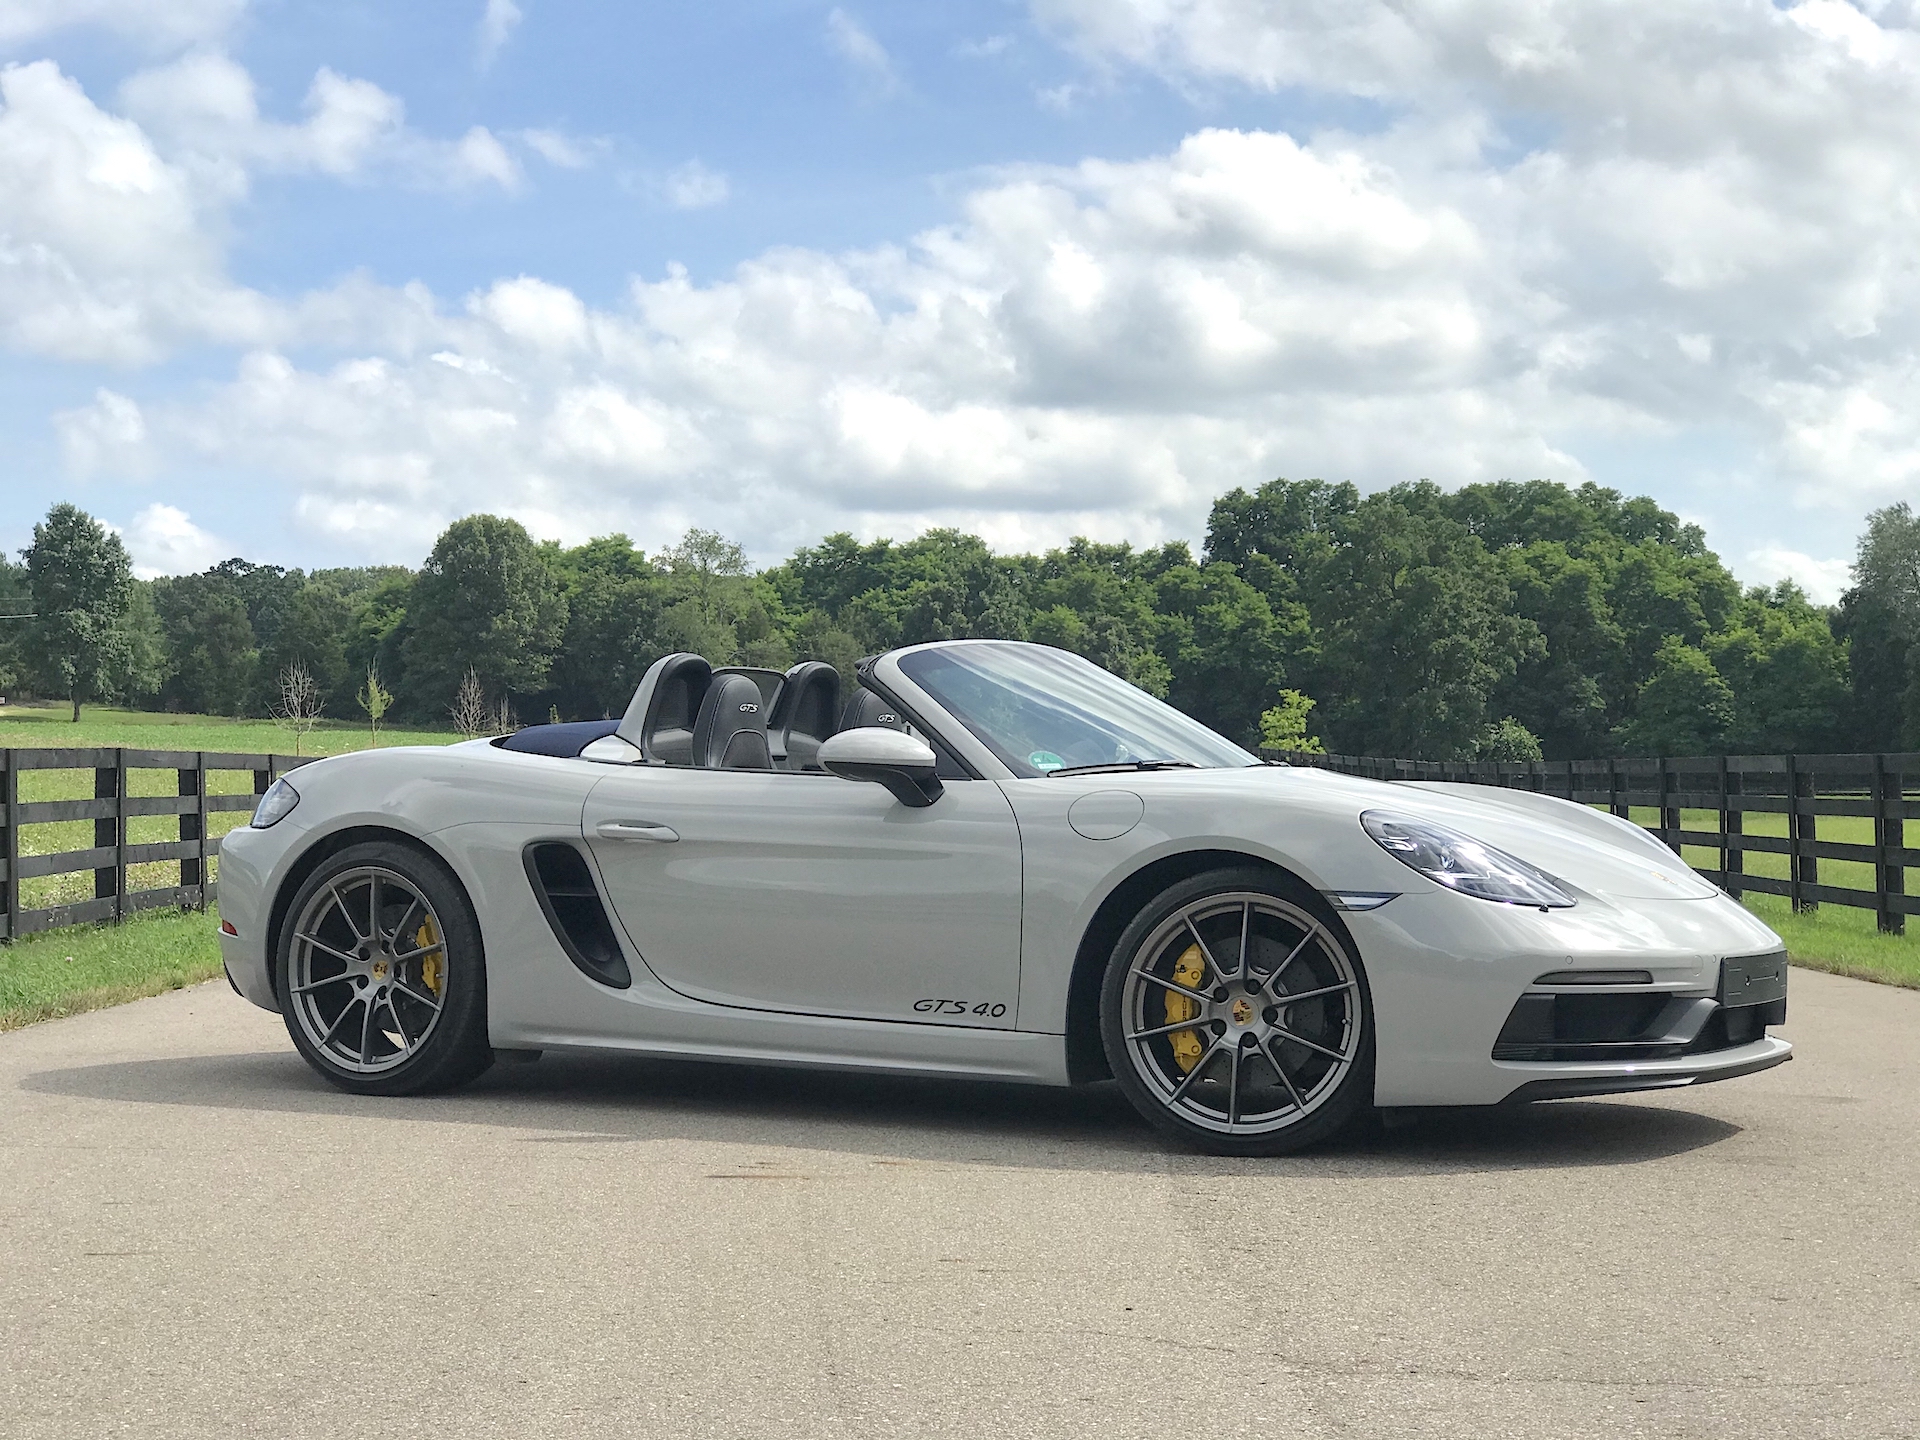 First drive review: 2020 Porsche 718 Boxster GTS 4.0 rocks to a